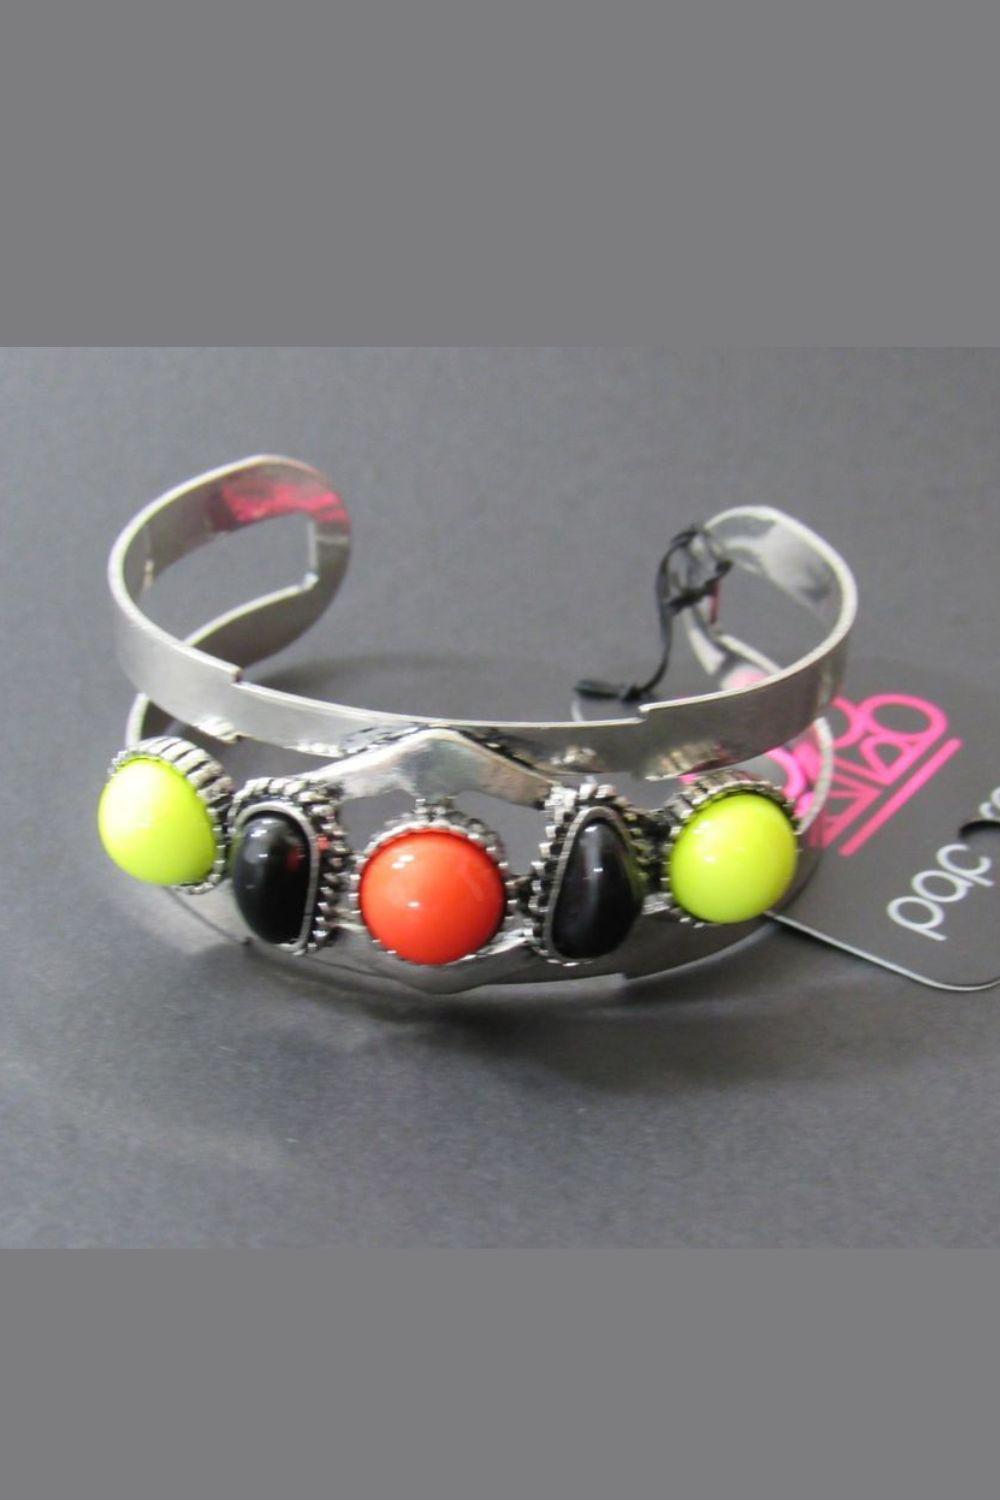 Keep On TRIBE-ing Multi-color Silver Cuff Bracelet - Paparazzi Accessories- on model - CarasShop.com - $5 Jewelry by Cara Jewels